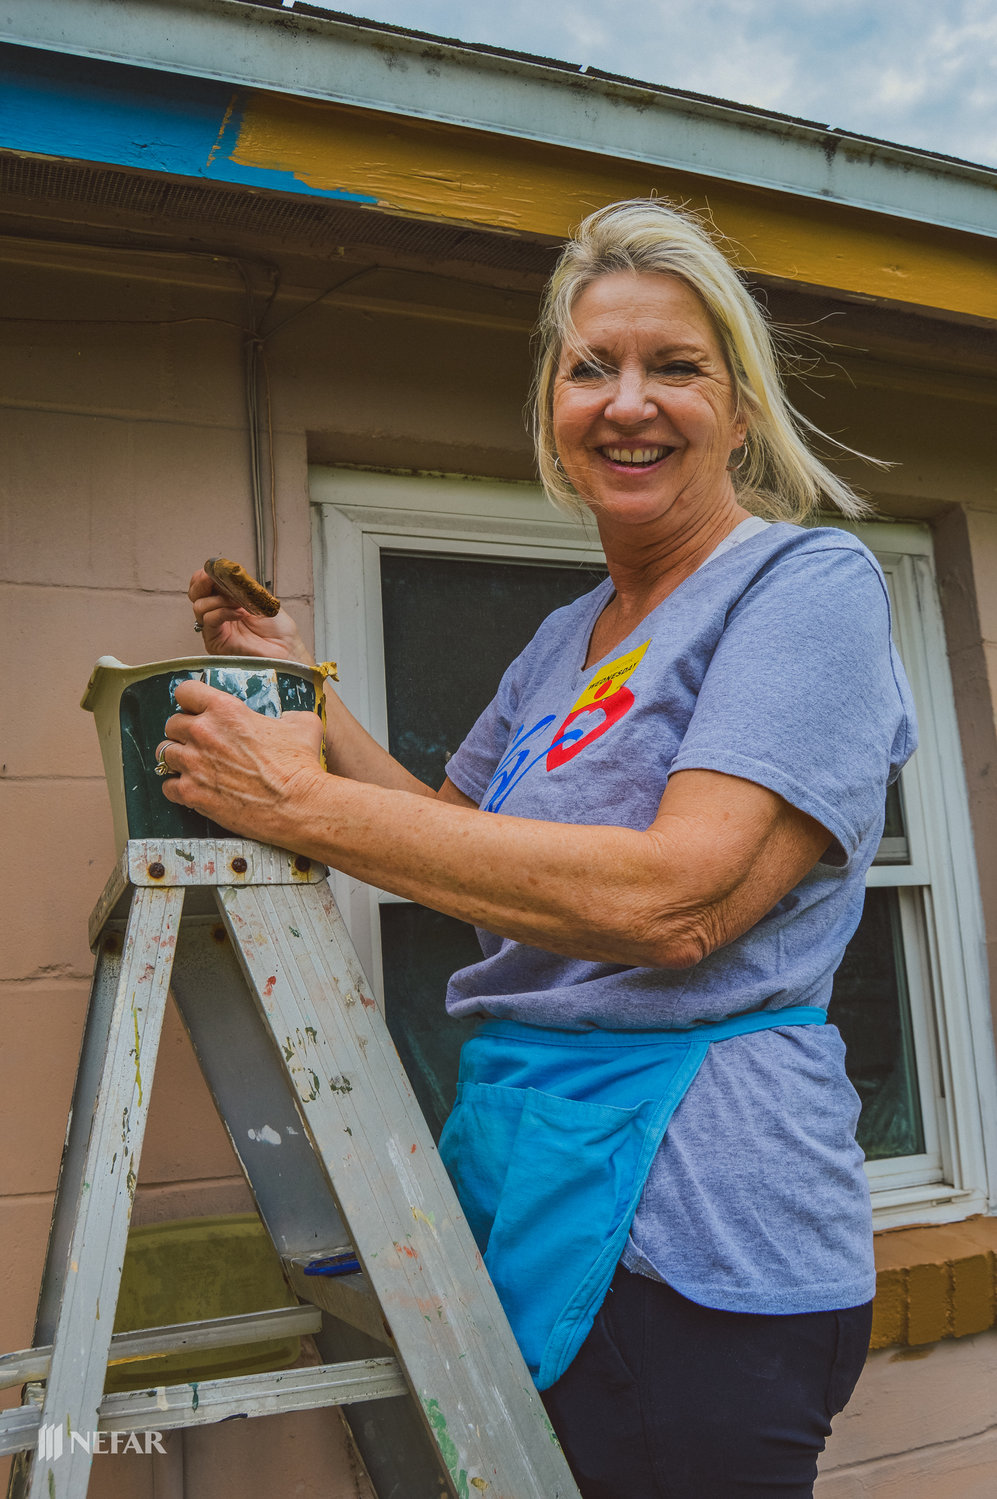 NEFAR Realtor Carole Bayer of Coldwell Banker Vanguard Realty in Ponte Vedra paints trim during a wheelchair ramp building event sponsored by the Northeast Florida Association of Realtors March 23.